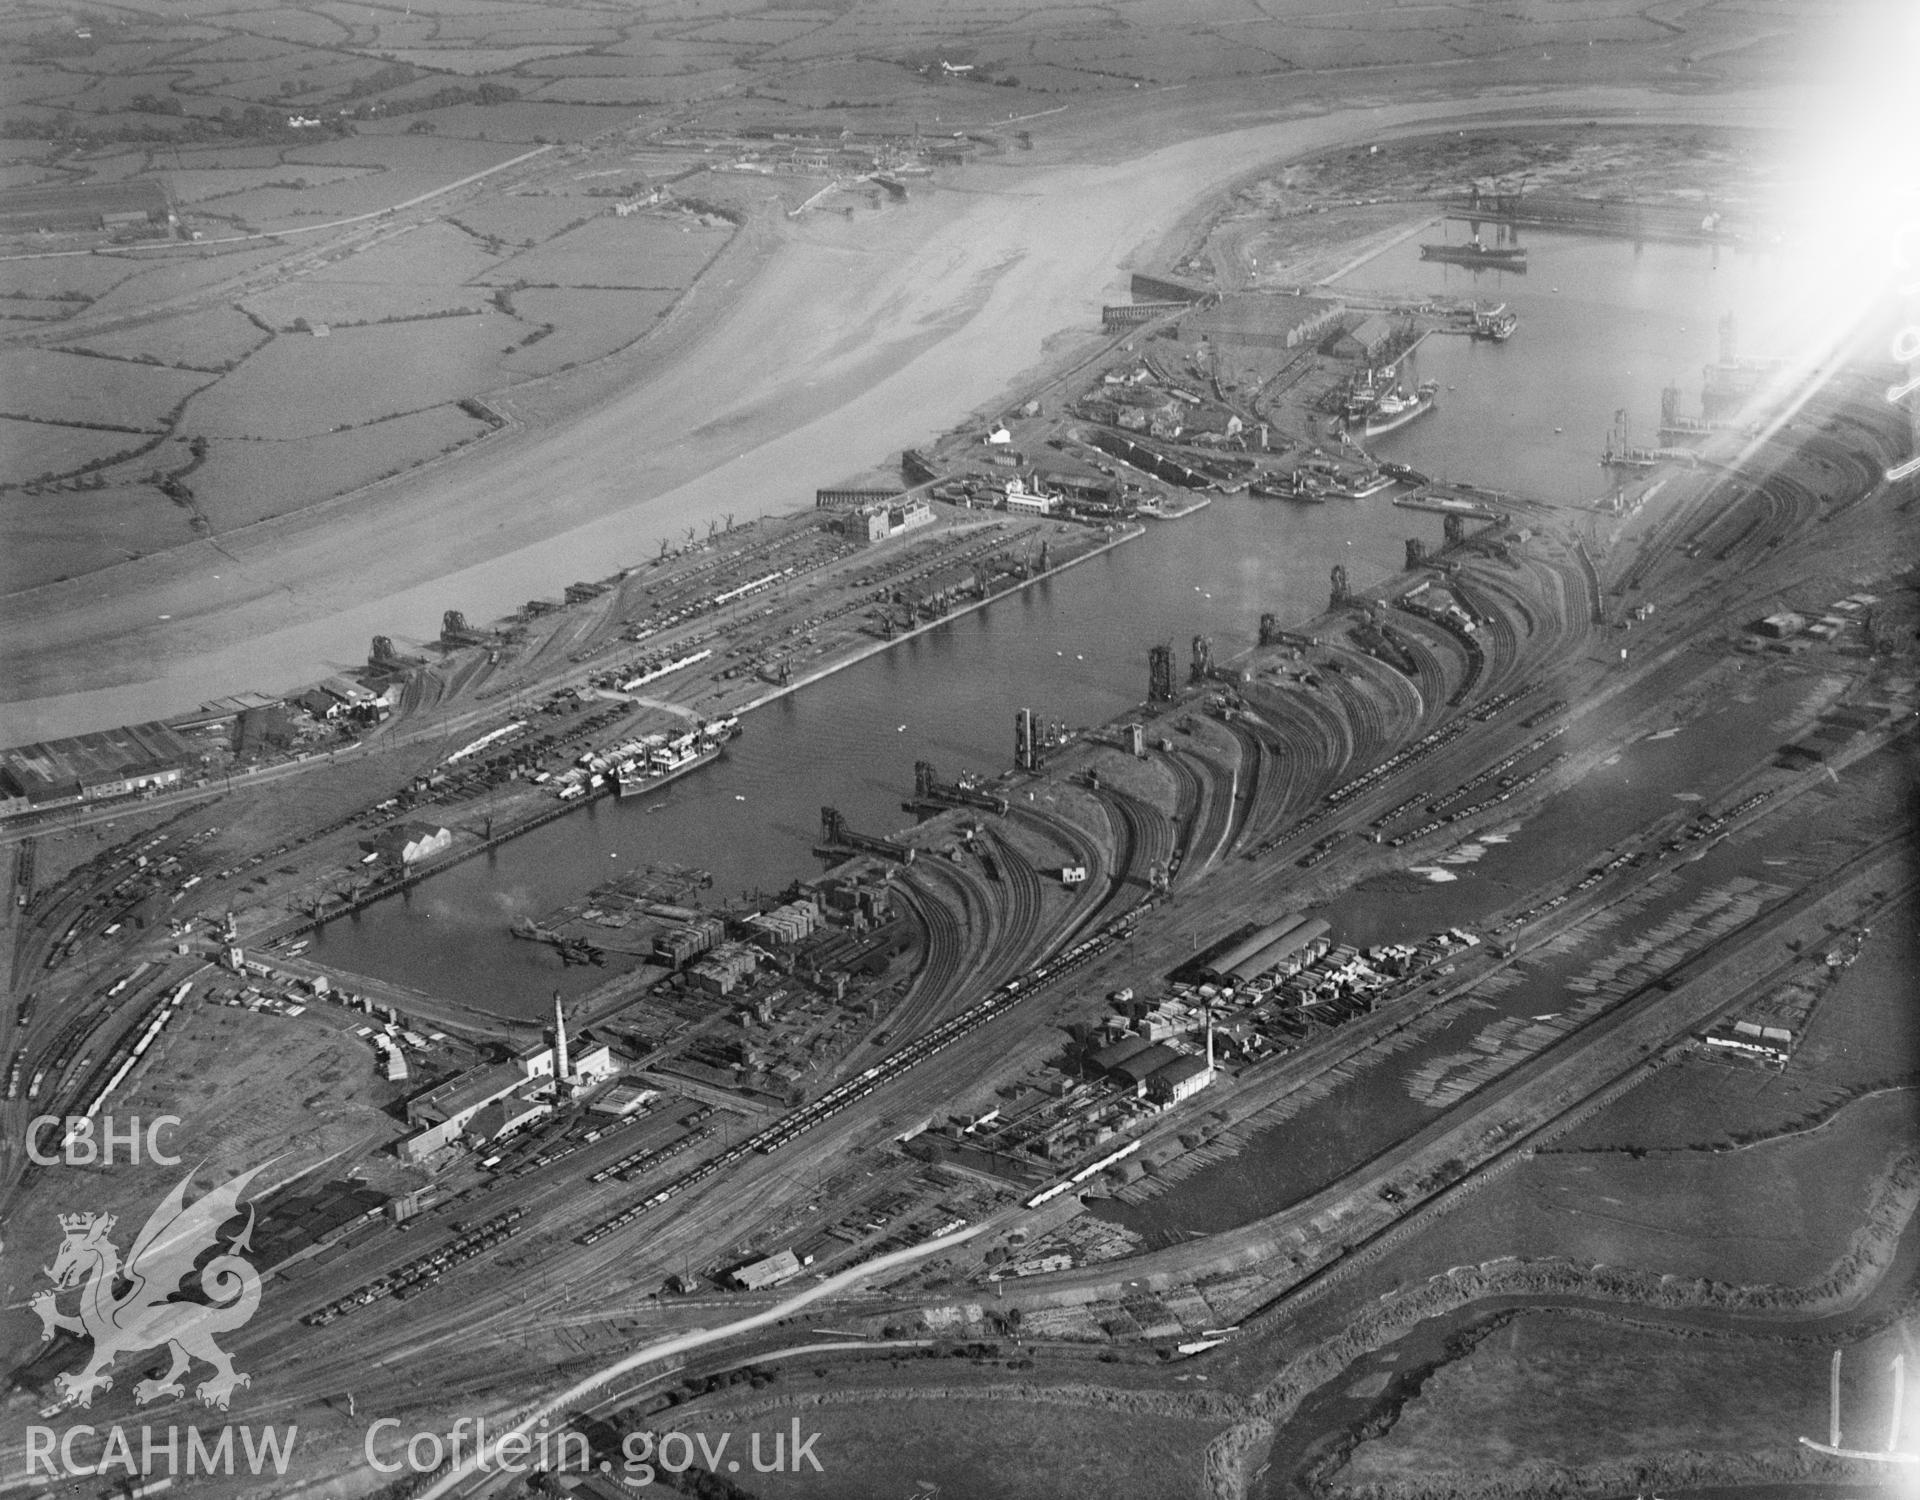 General view of Docks, oblique aerial view. 5?x4? black and white glass plate negative.